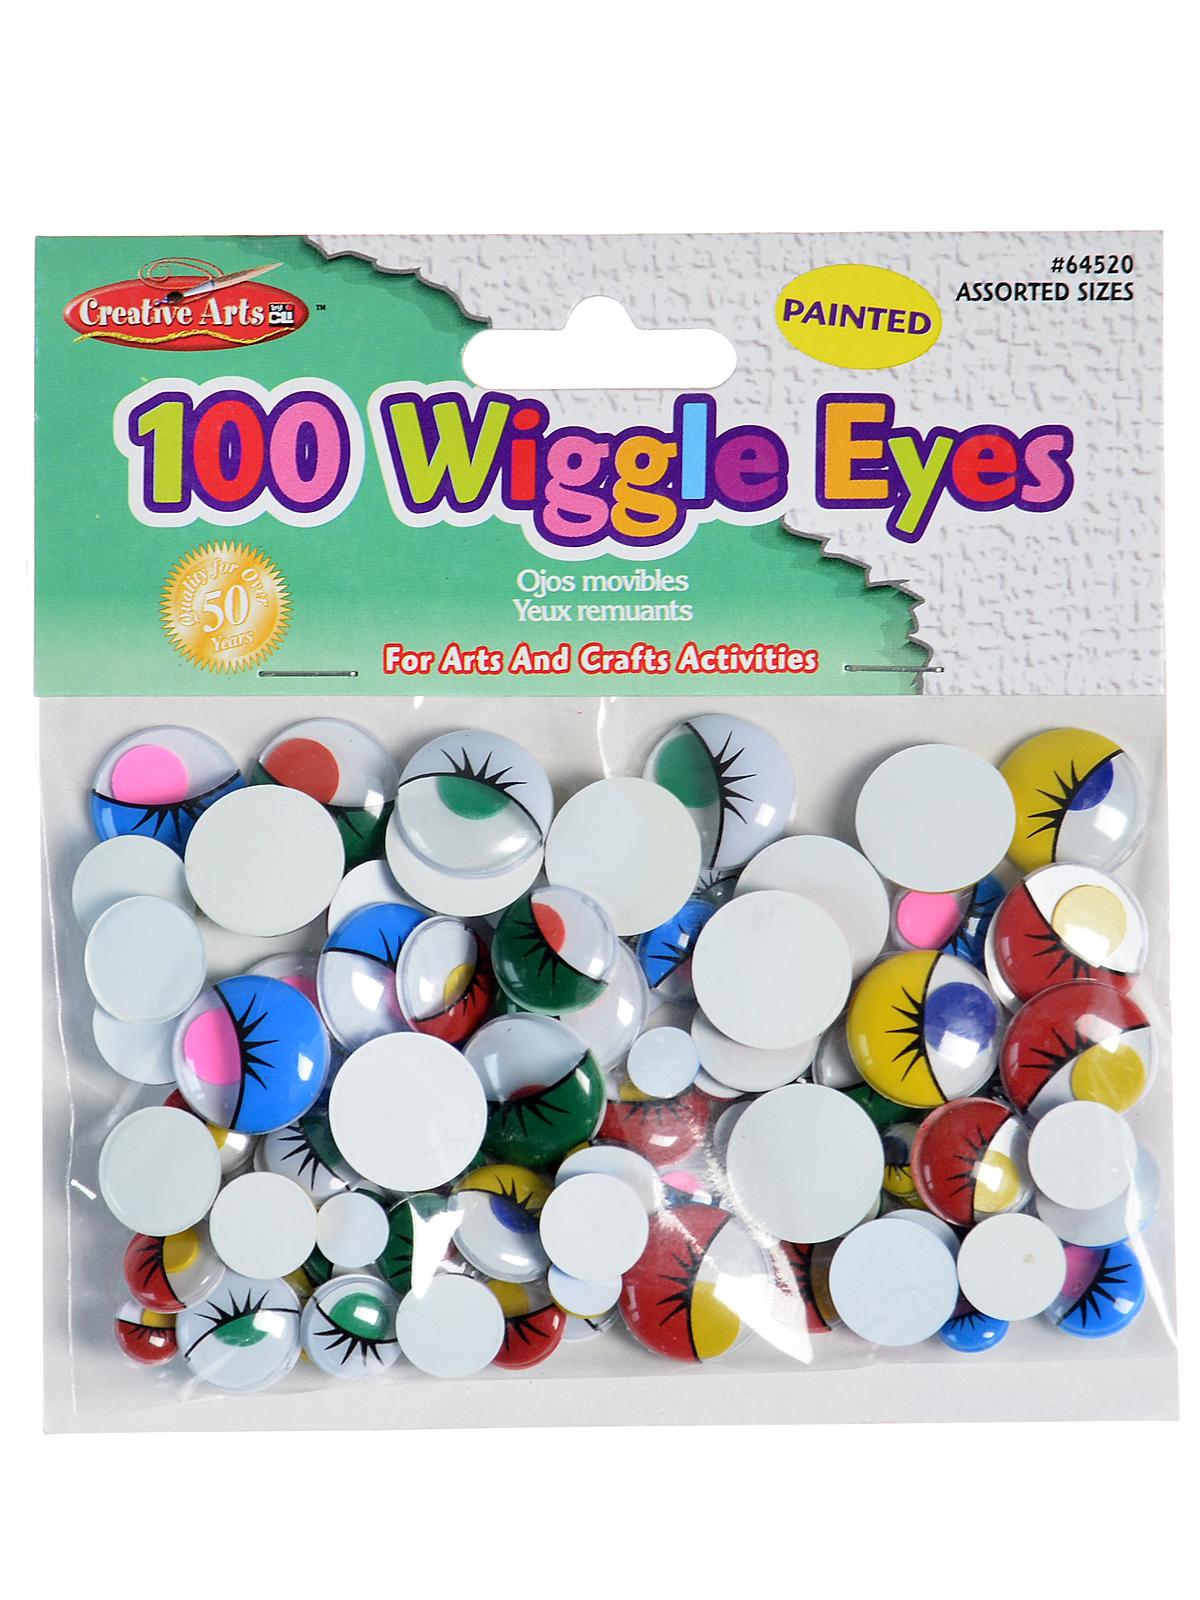 Wiggle Eyes 100 Pieces; Painted Assorted Assorted